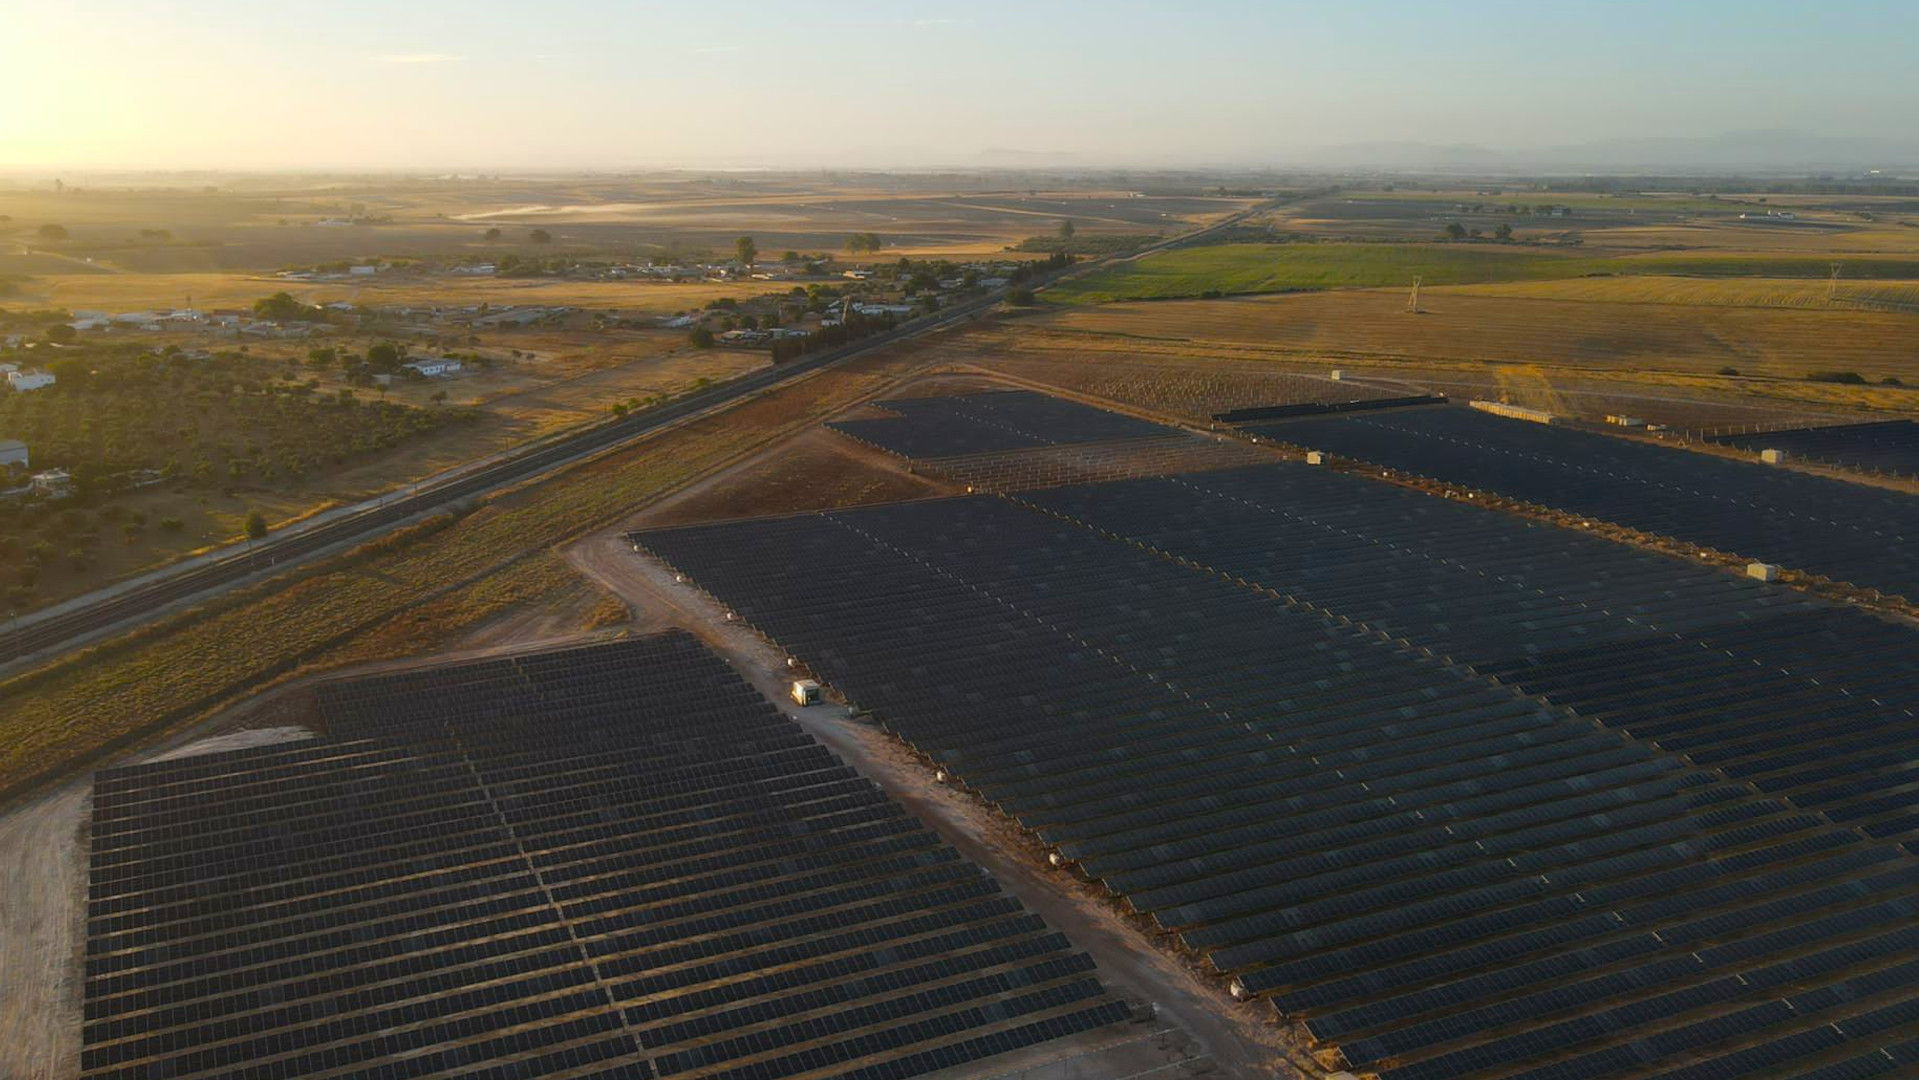 The VPPA ensures the development of a new solar power plant in Dos Hermanas (Seville), Spain. ​ Photo courtesy of BayWa r.e.